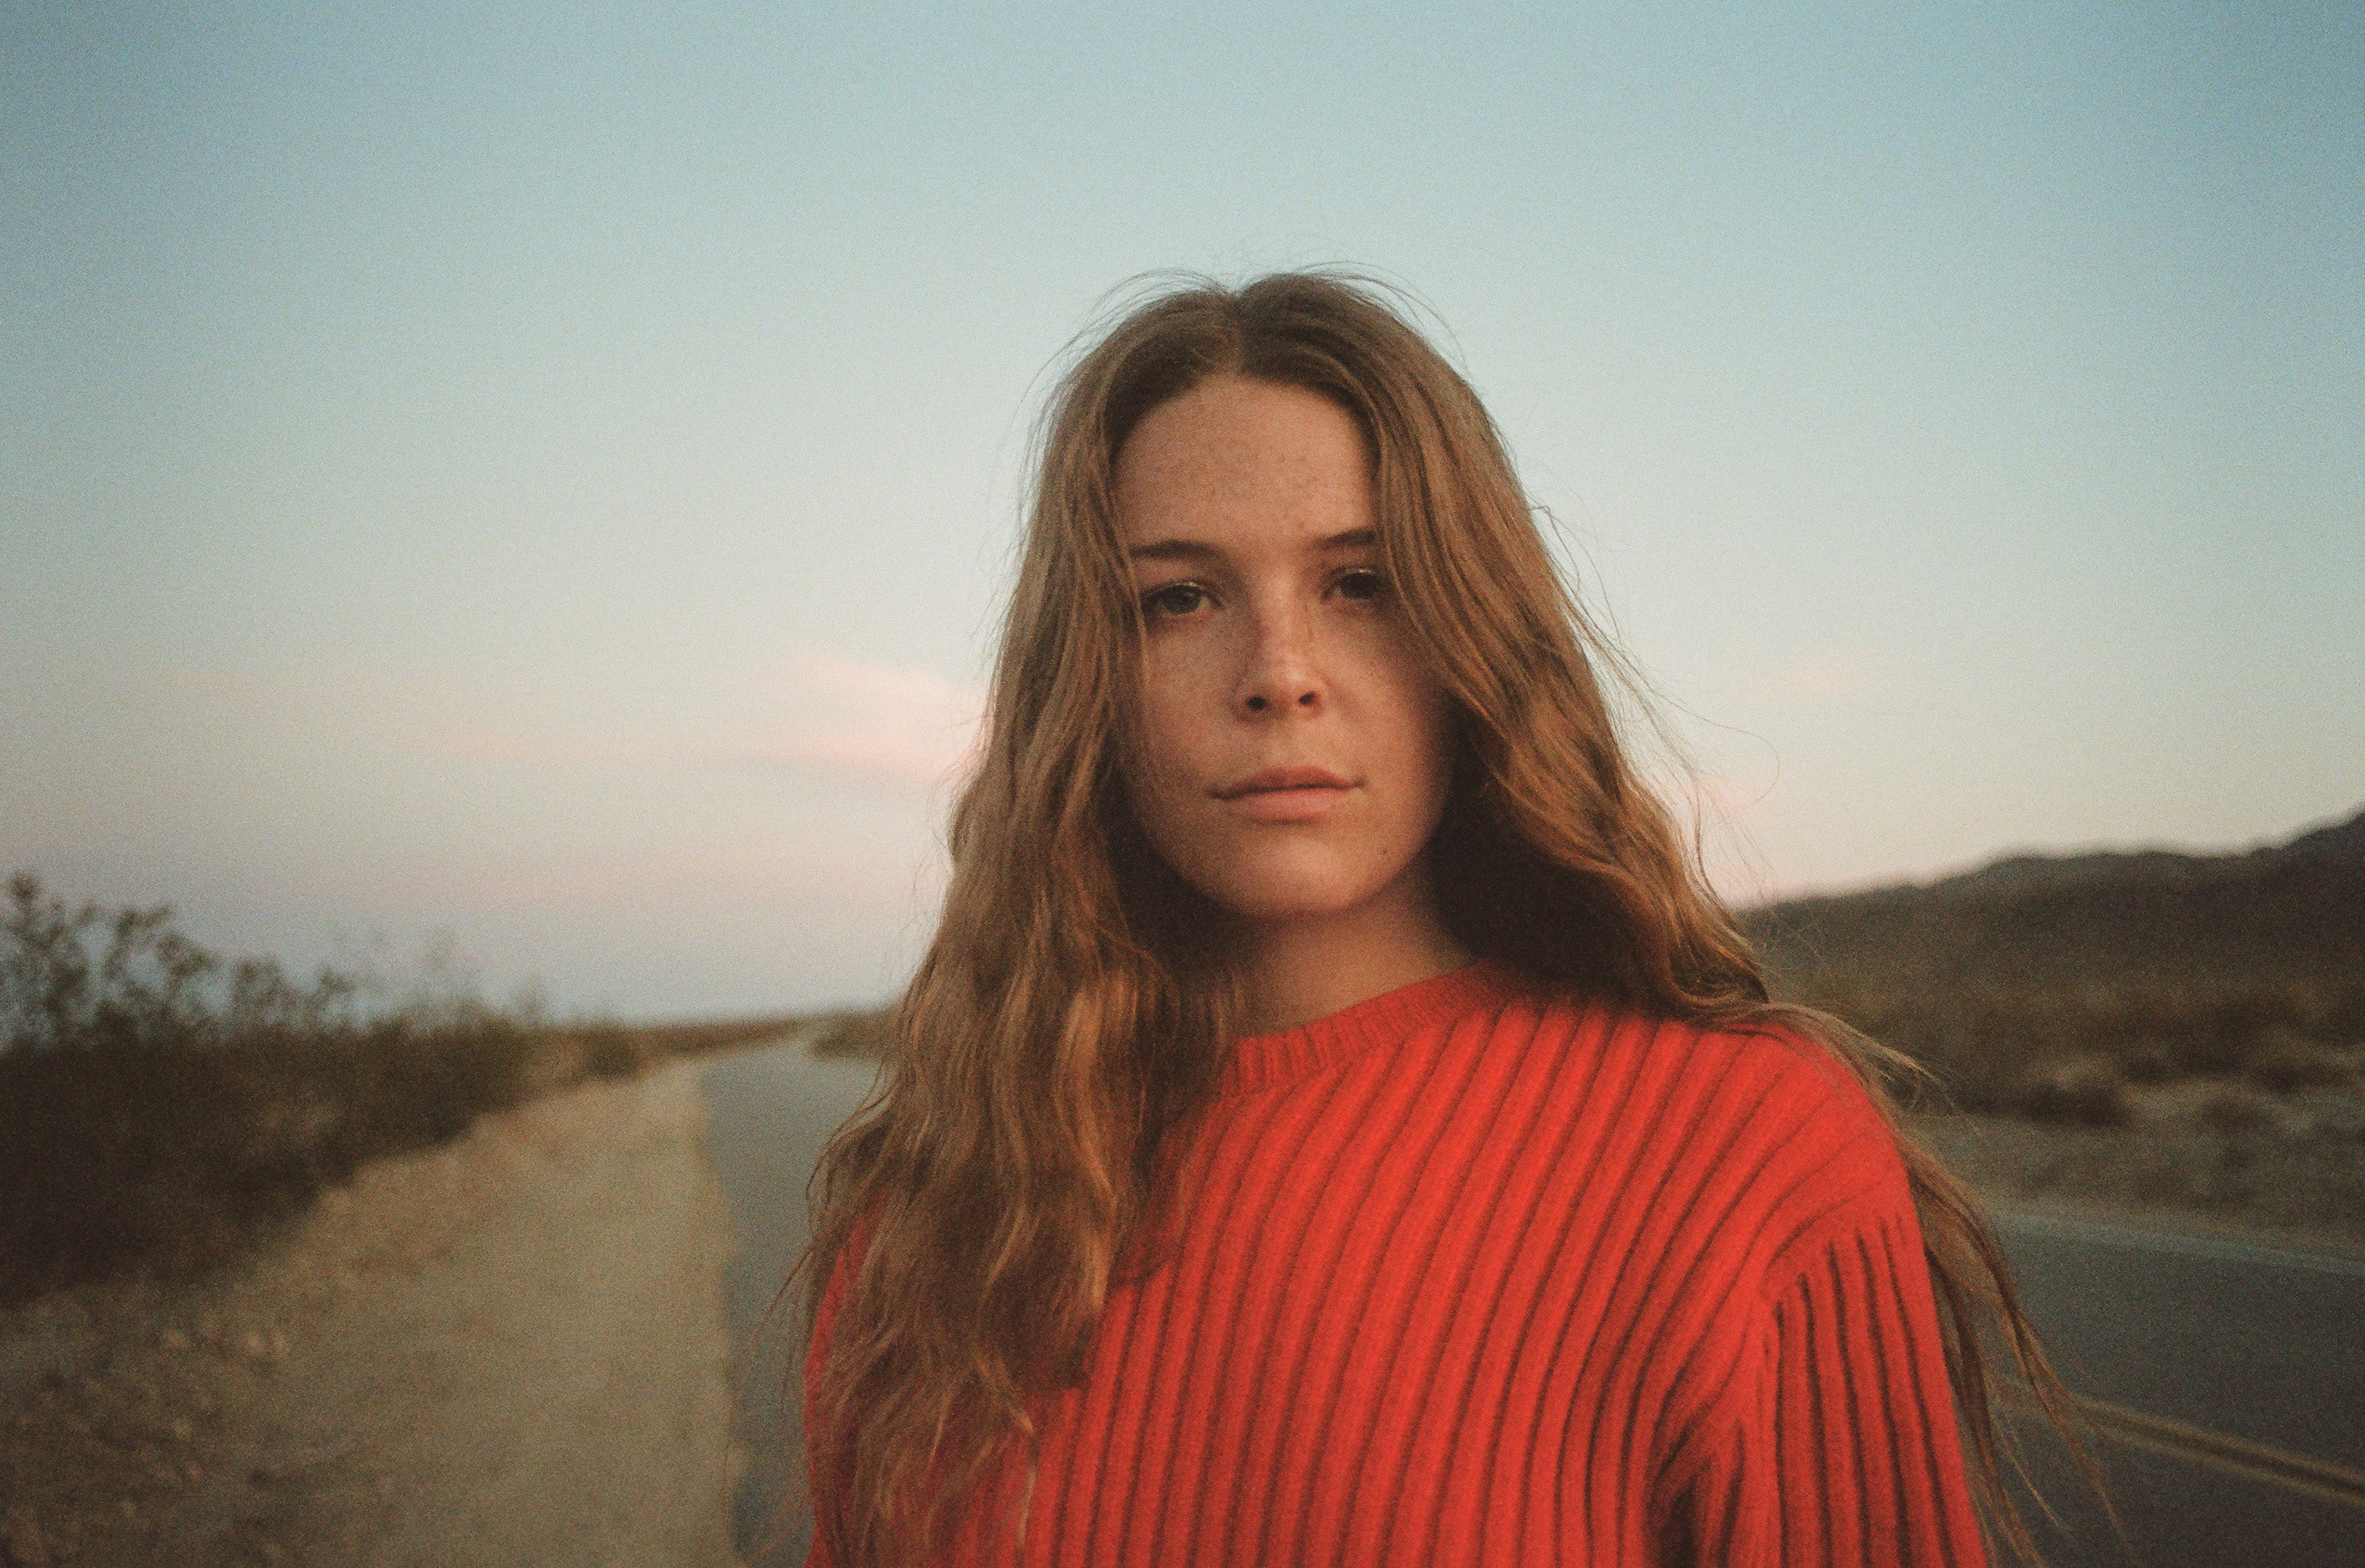 MAGGIE ROGERS